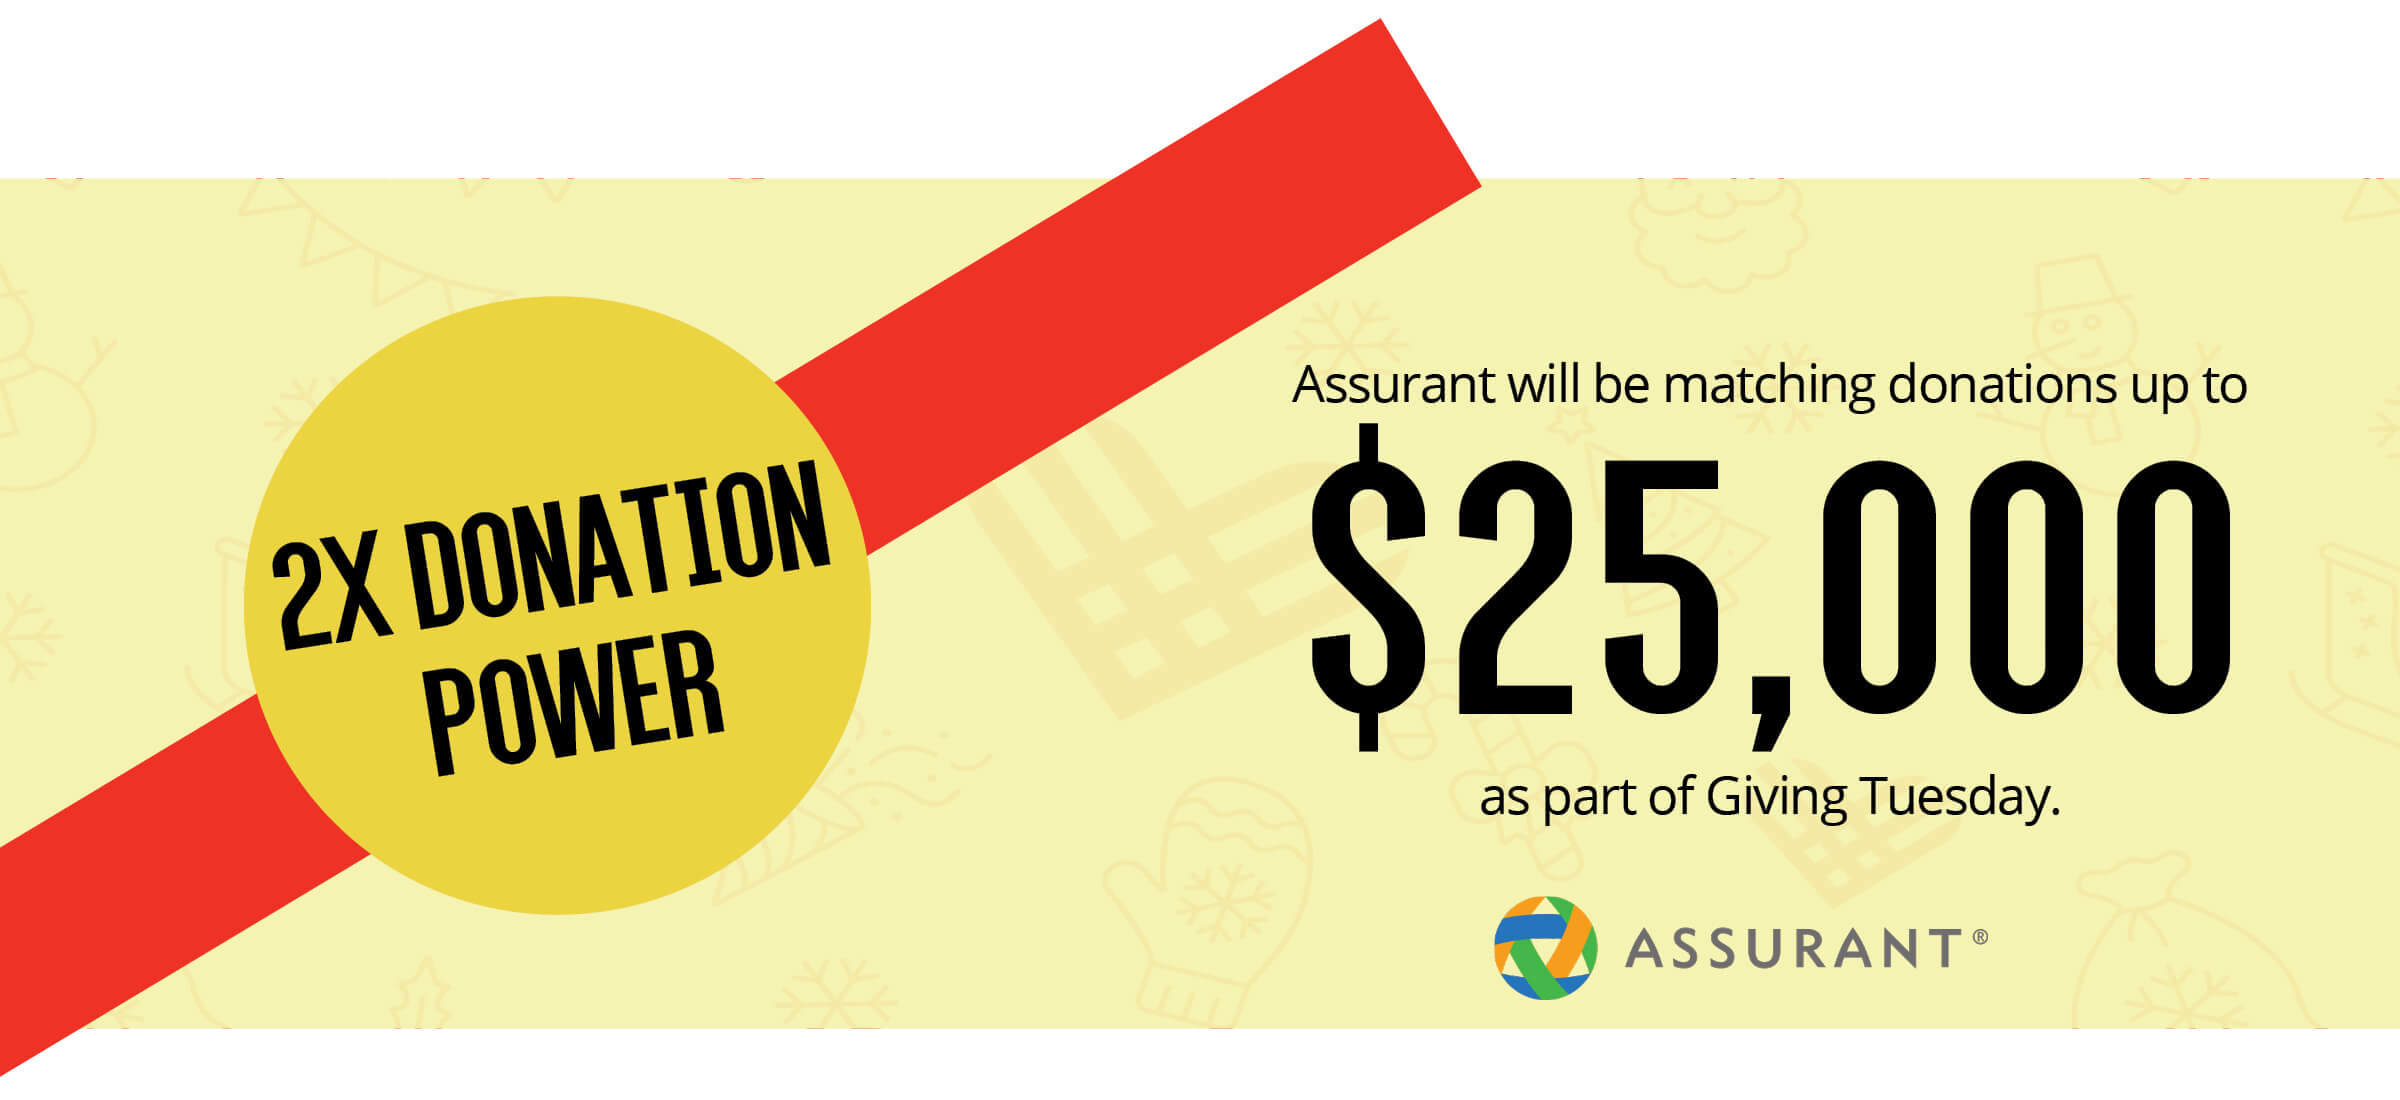 Assurant will match up to $25,000